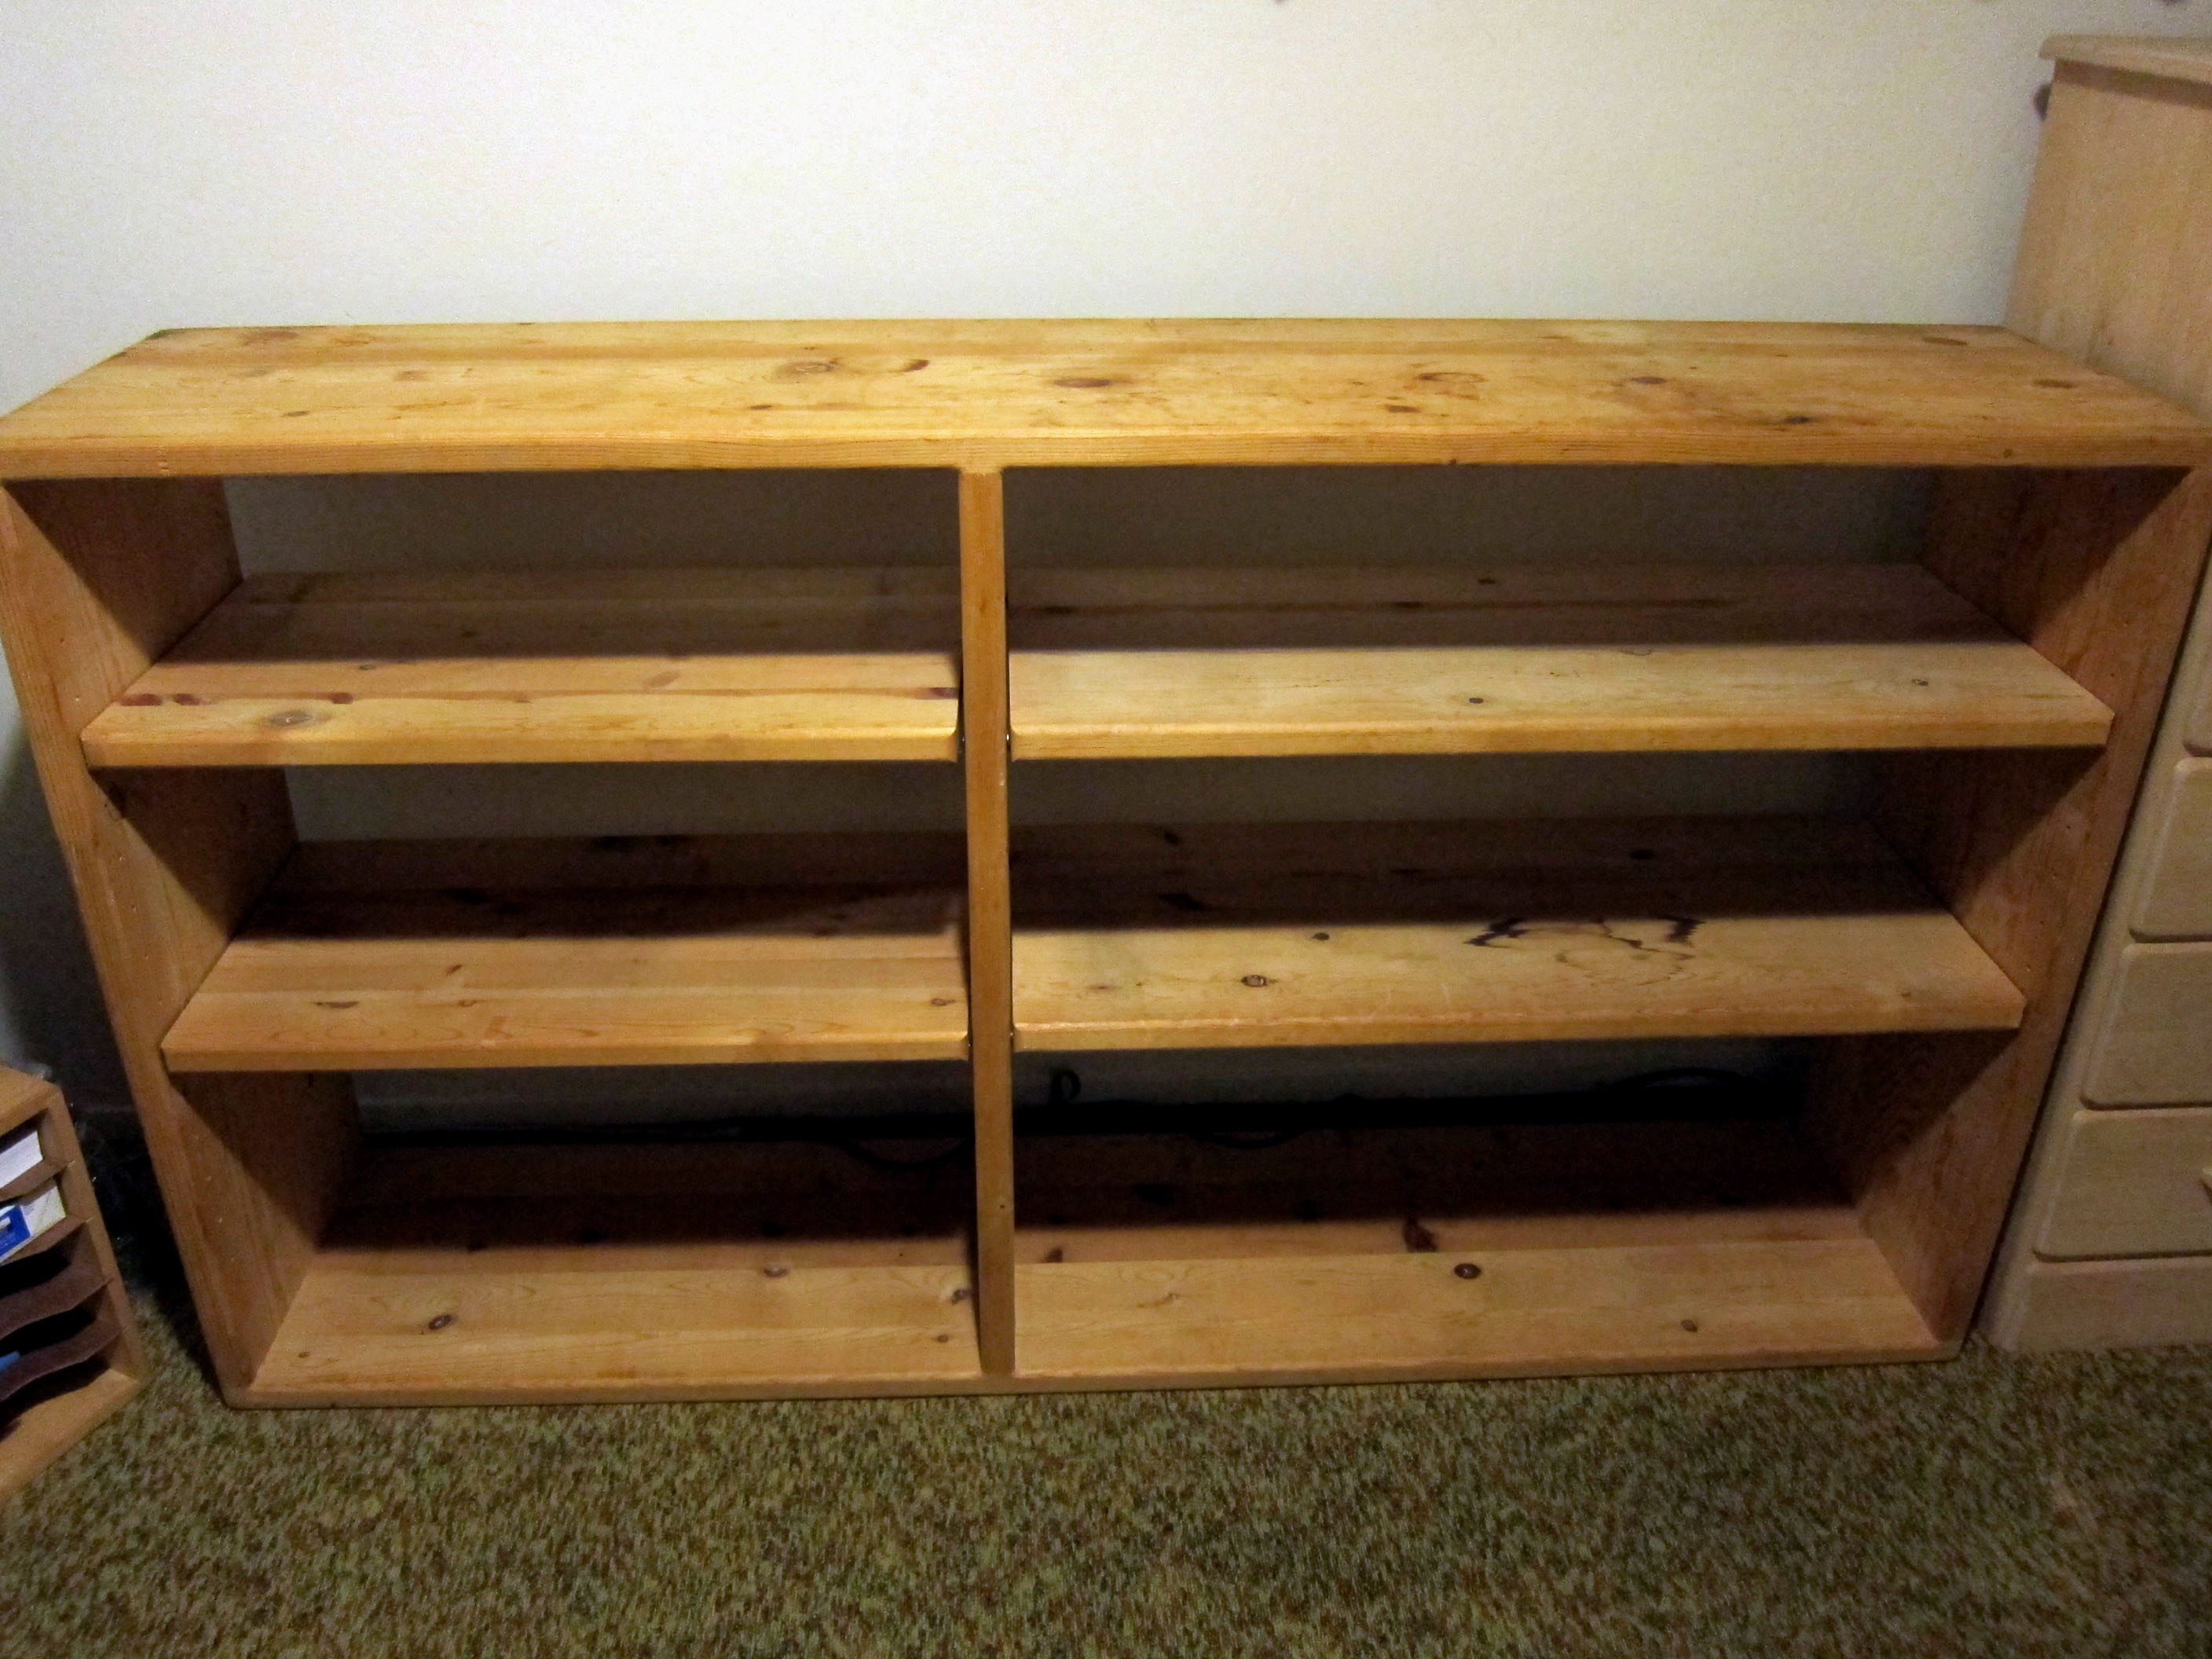 Sturdy Solid Pine Shelf Up for Grabs